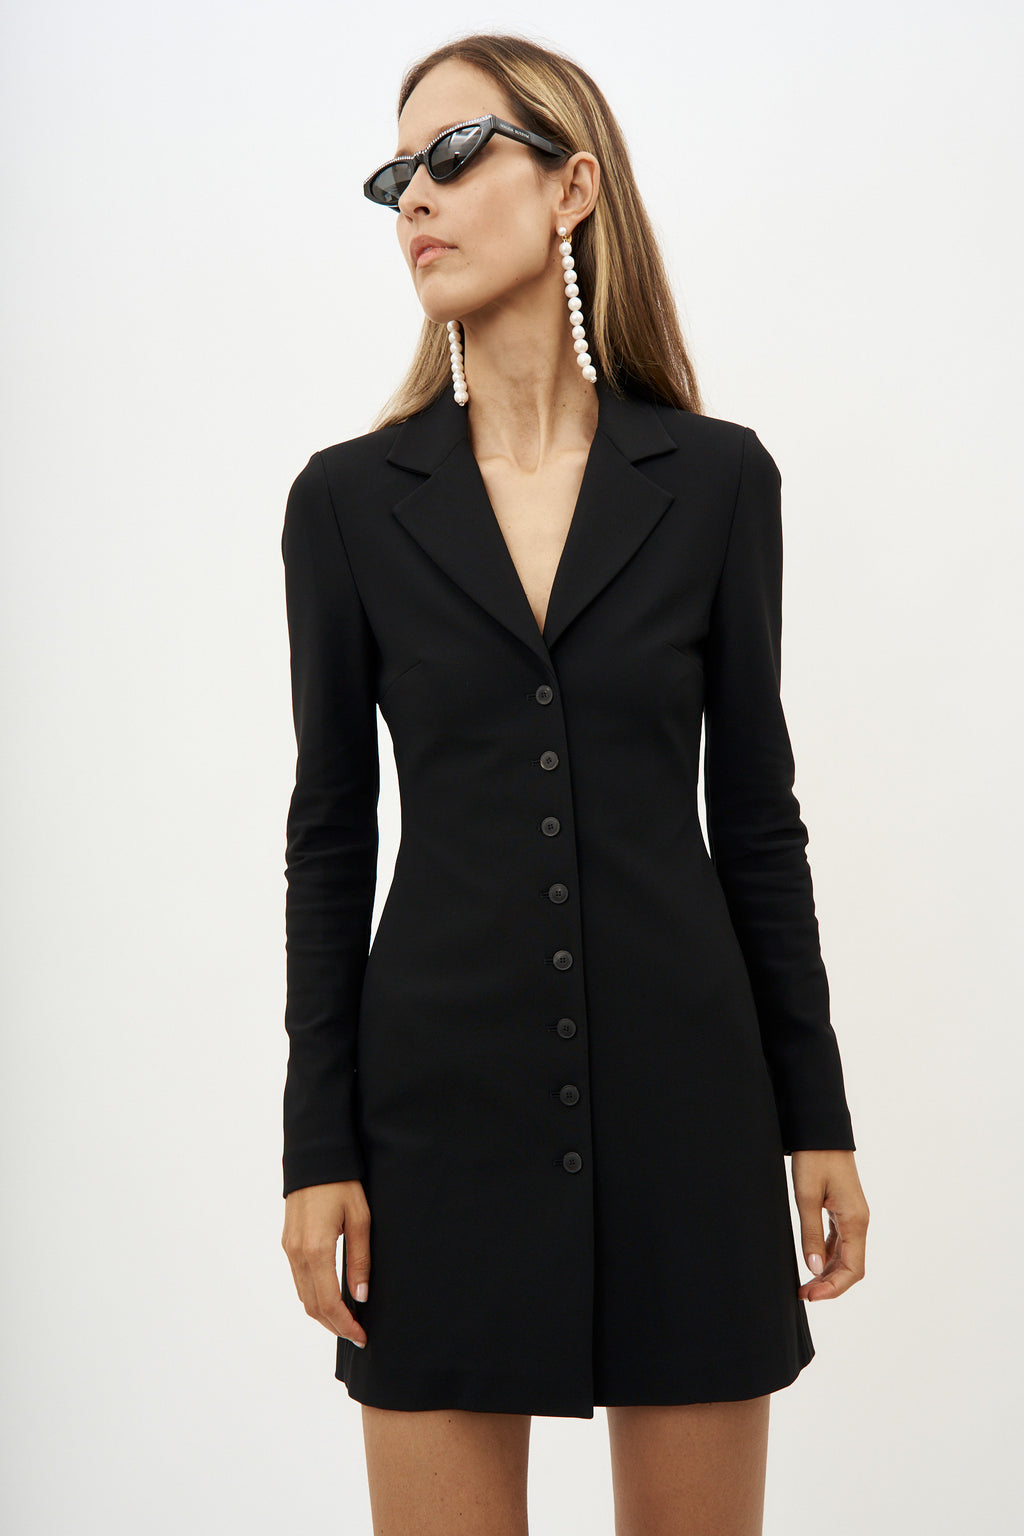 Knit Buttoned Black Peacoat